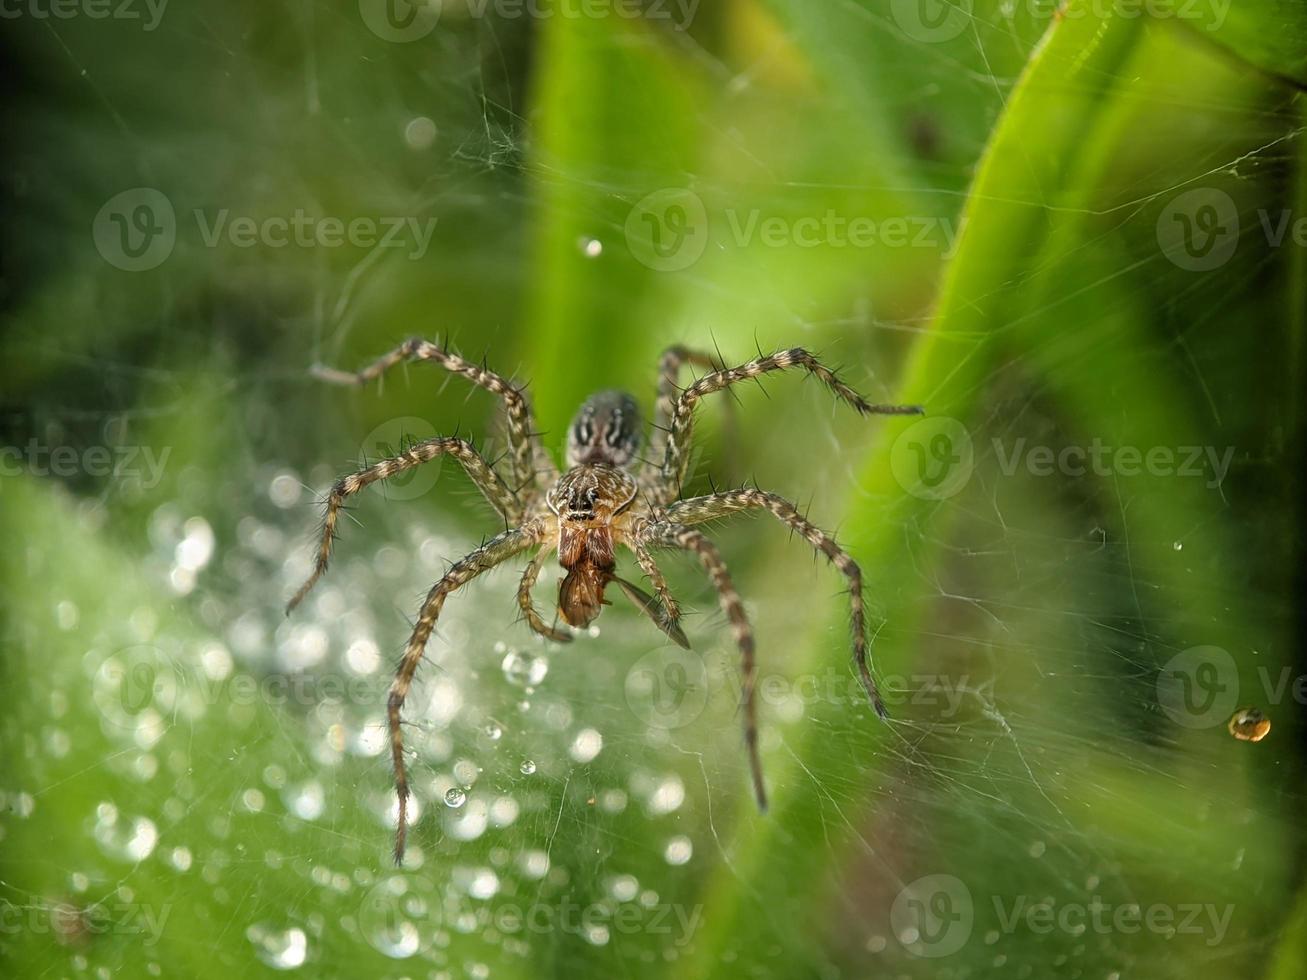 Dewdrops on spider web in the morning, macro photography, extreme close up photo